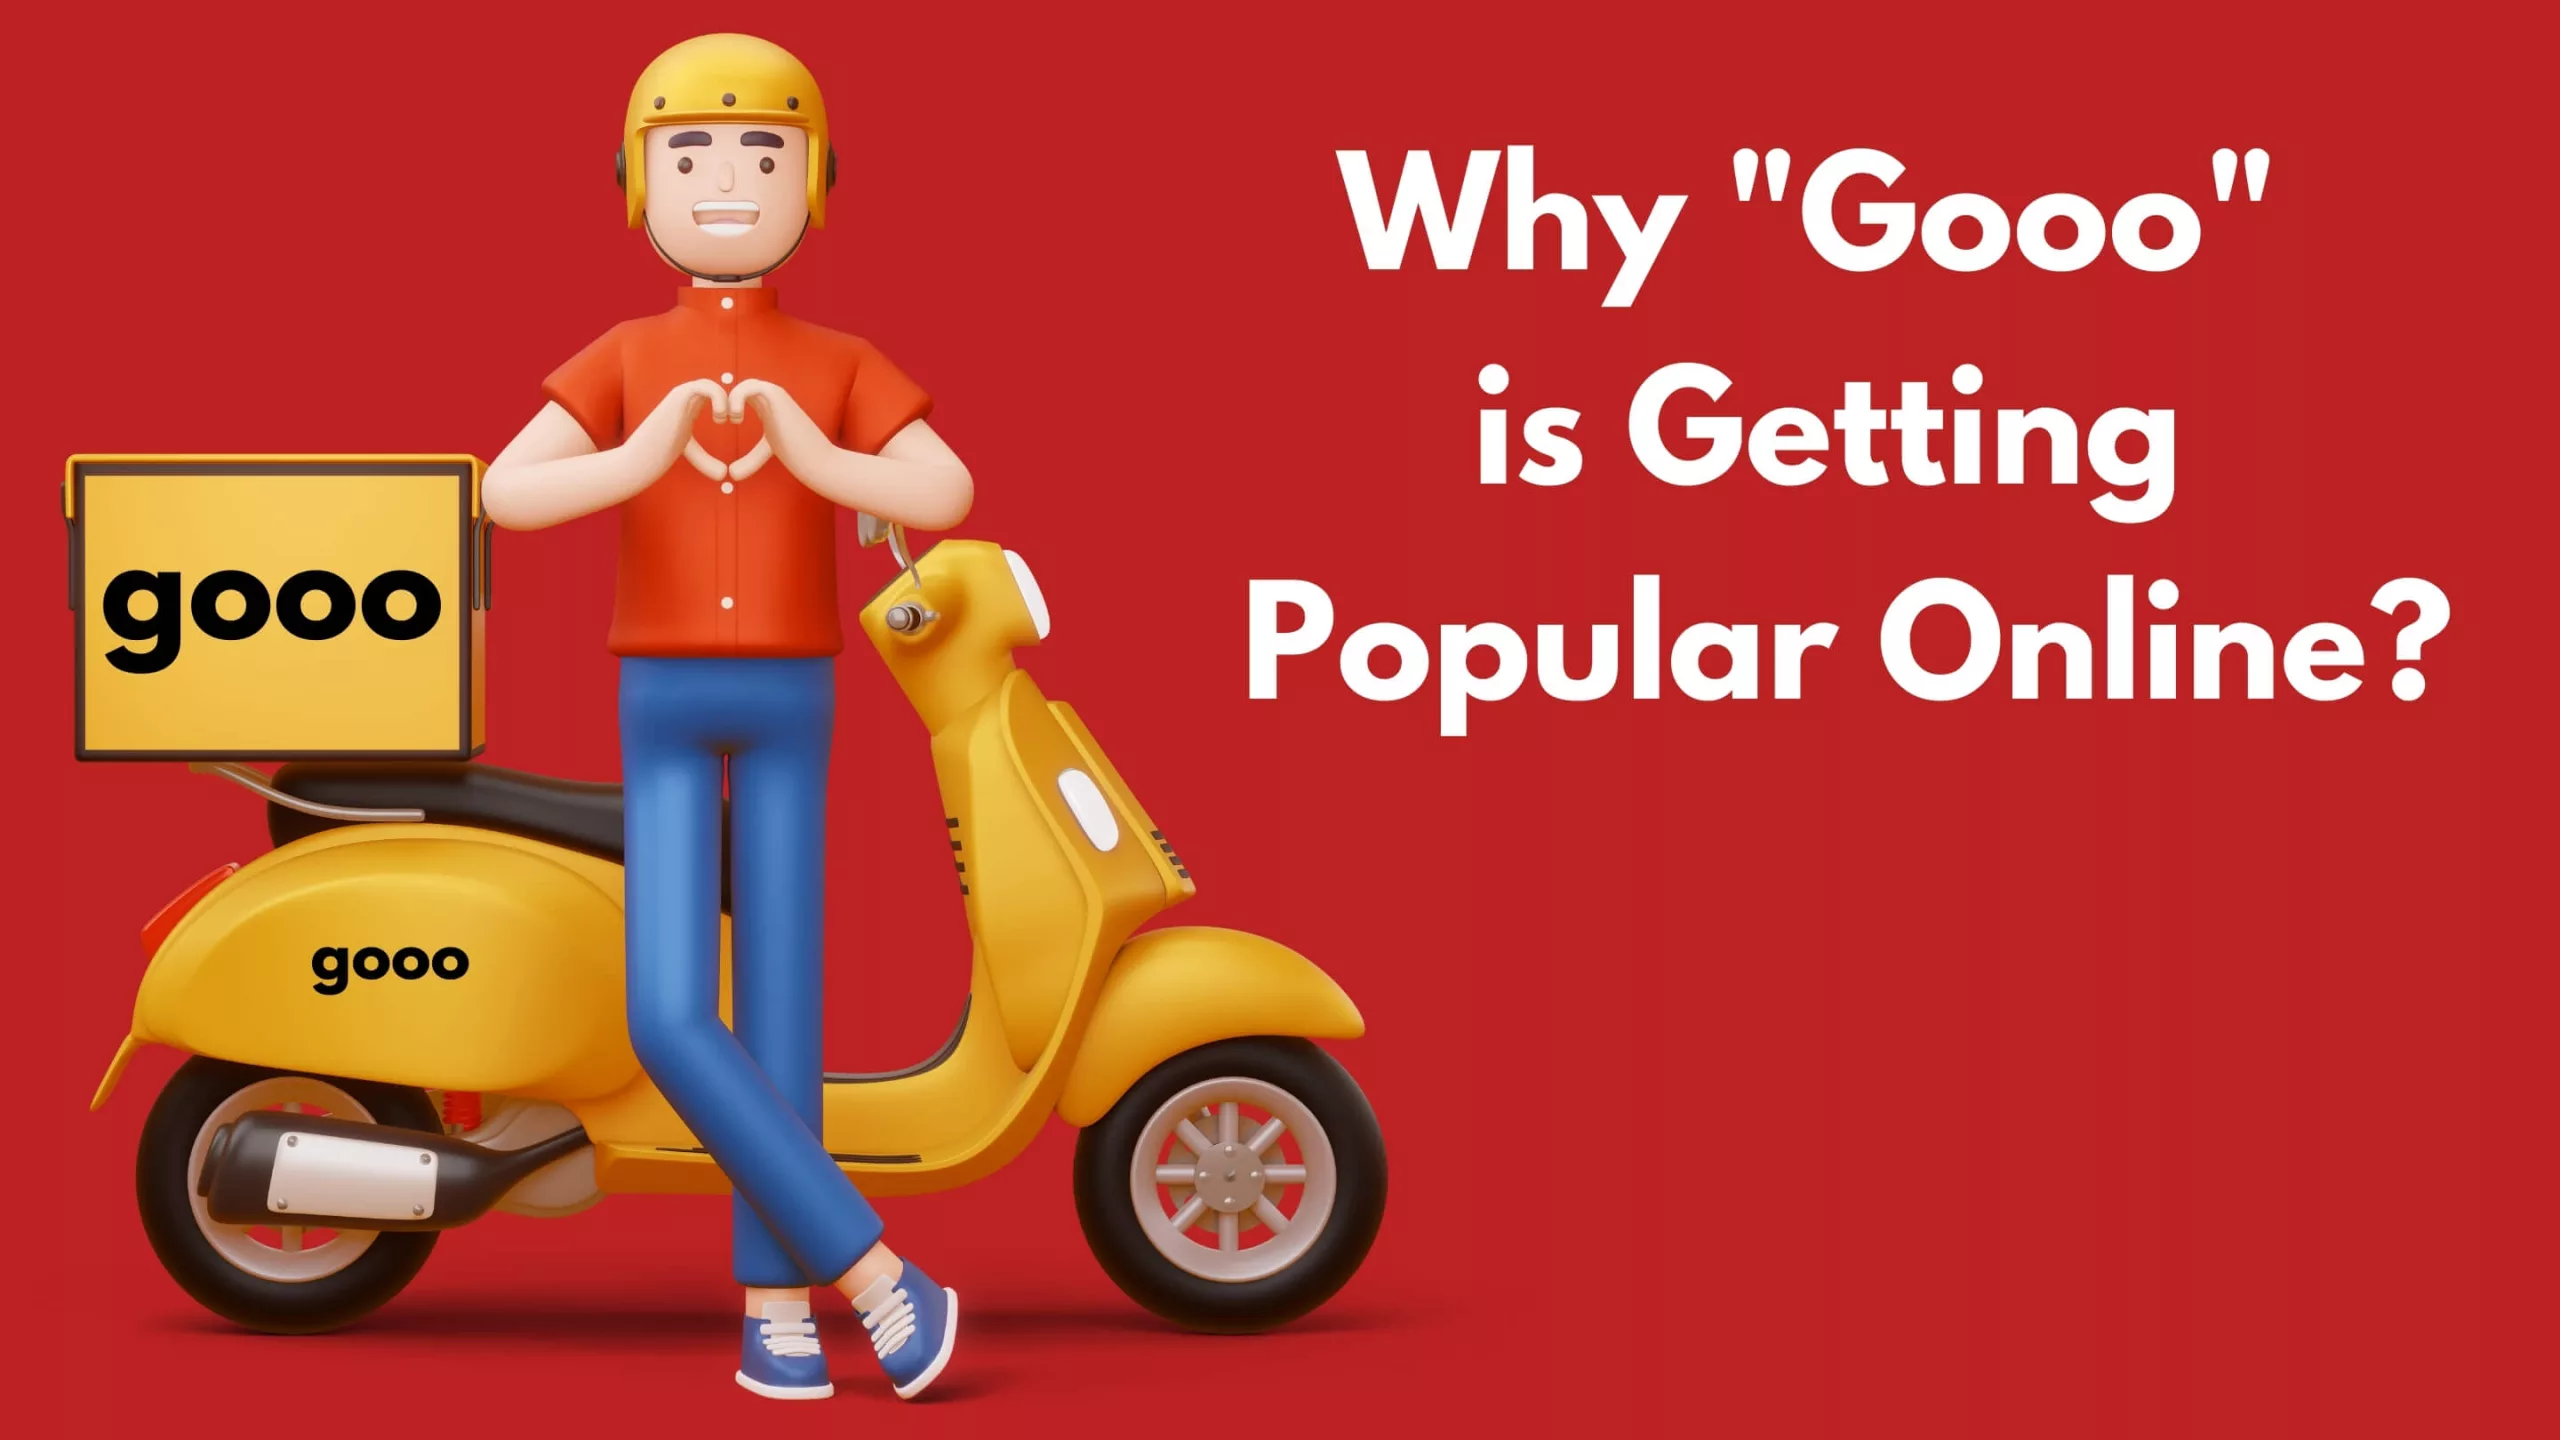 Why "Gooo" is Getting Popular Online?